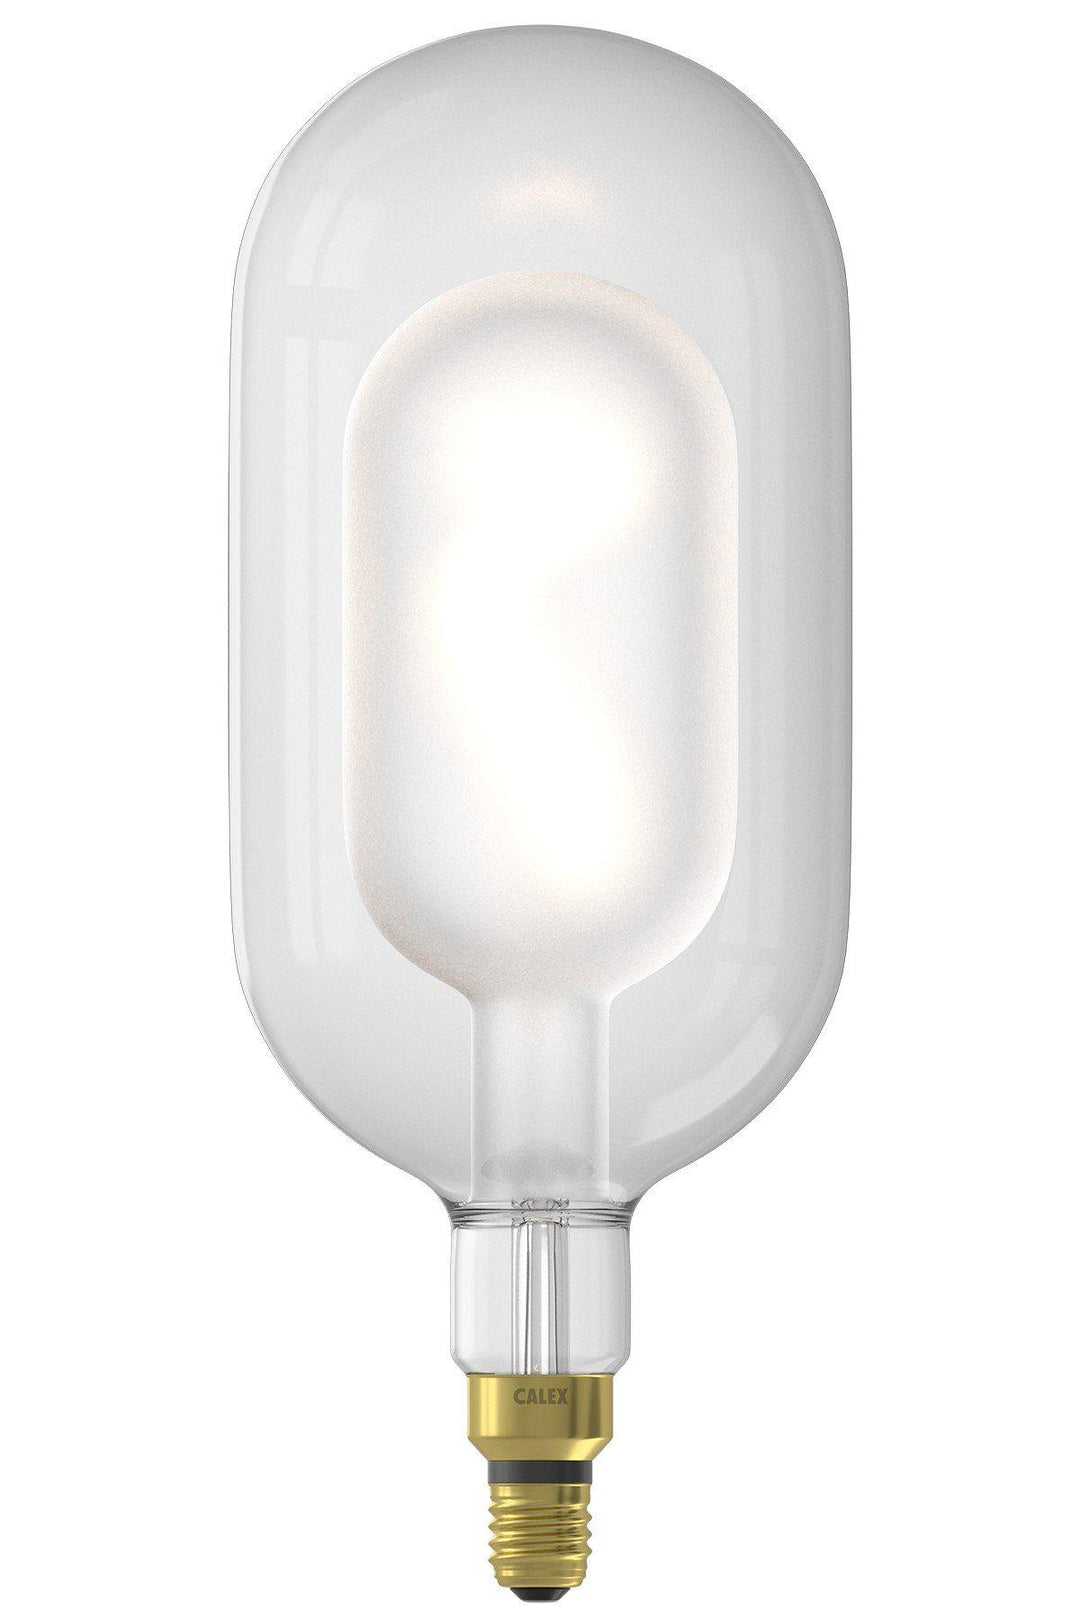 Calex 426132 | LED Clear/Frosted Fusion Sundsvall Bulb | E27 | T150 | 3W